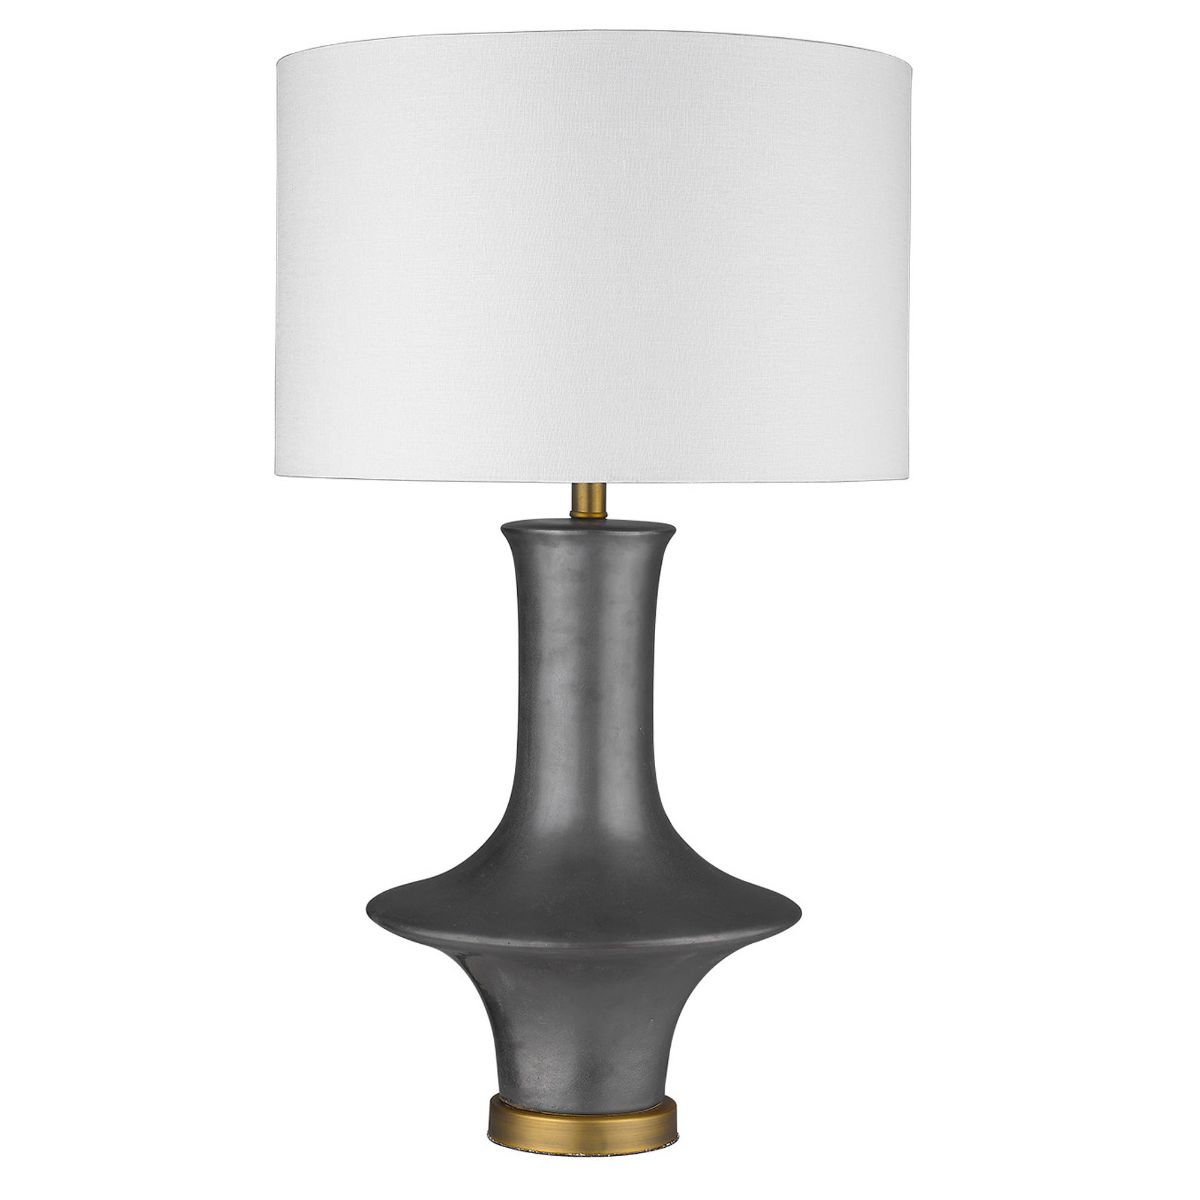 Trend Home 1 Light Table Lamp Iron Ceramic Body and Brass Accents